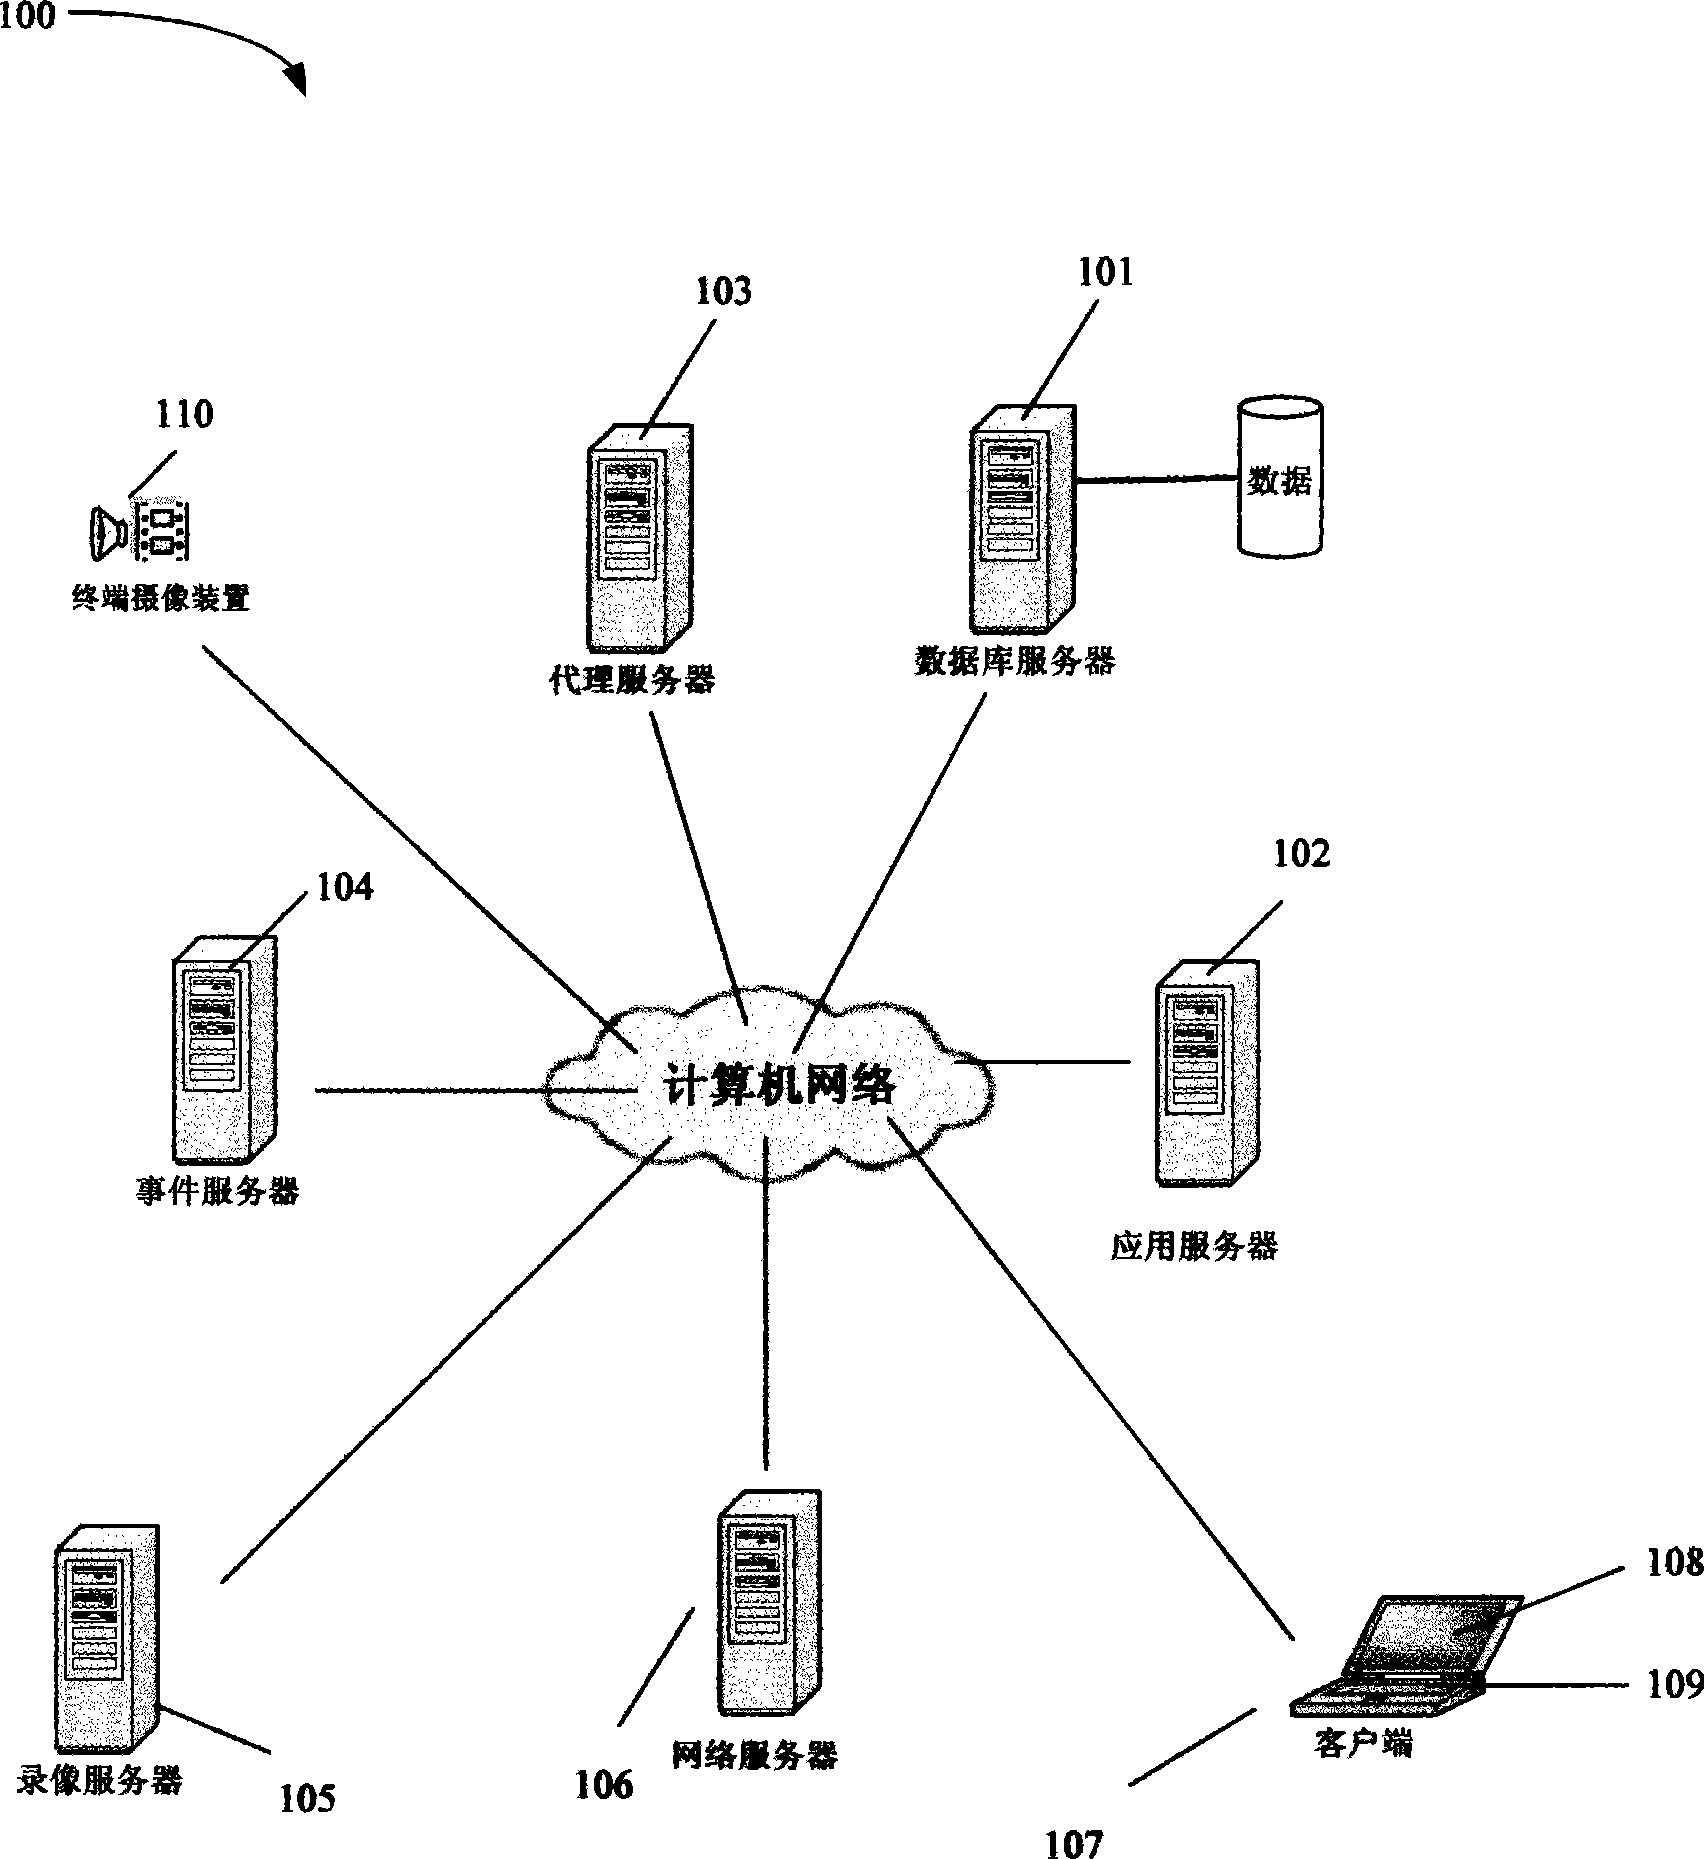 System configuring information modifying and storing method used by network video monitoring system